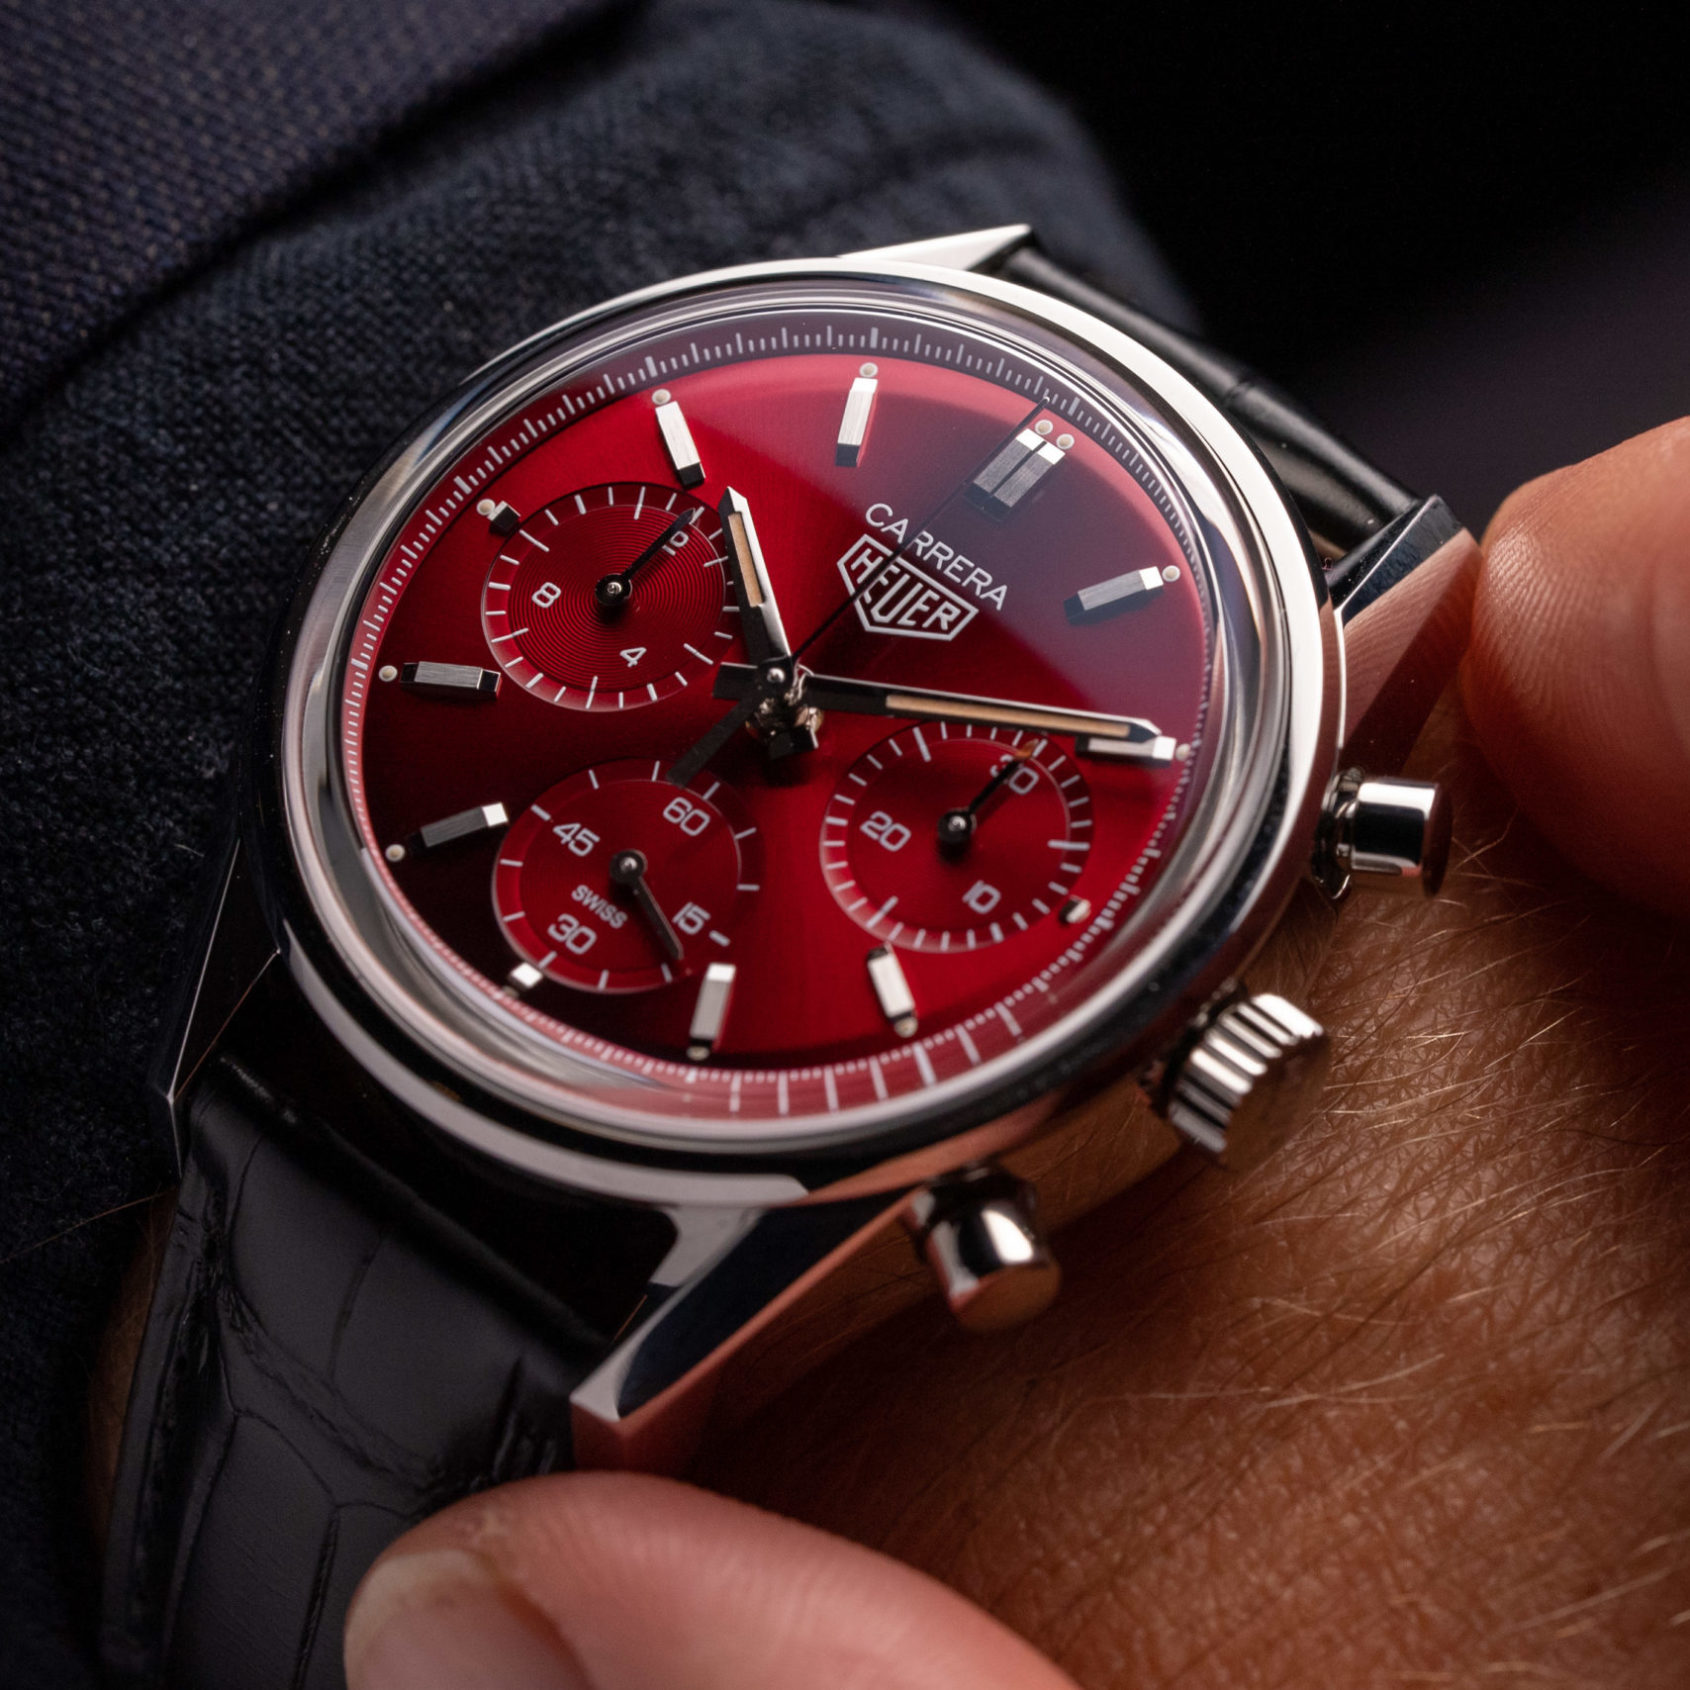 VIDEO: Cherry, cherry baby. TAG Heuer debuts new Carrera Red Dial Limited Edition